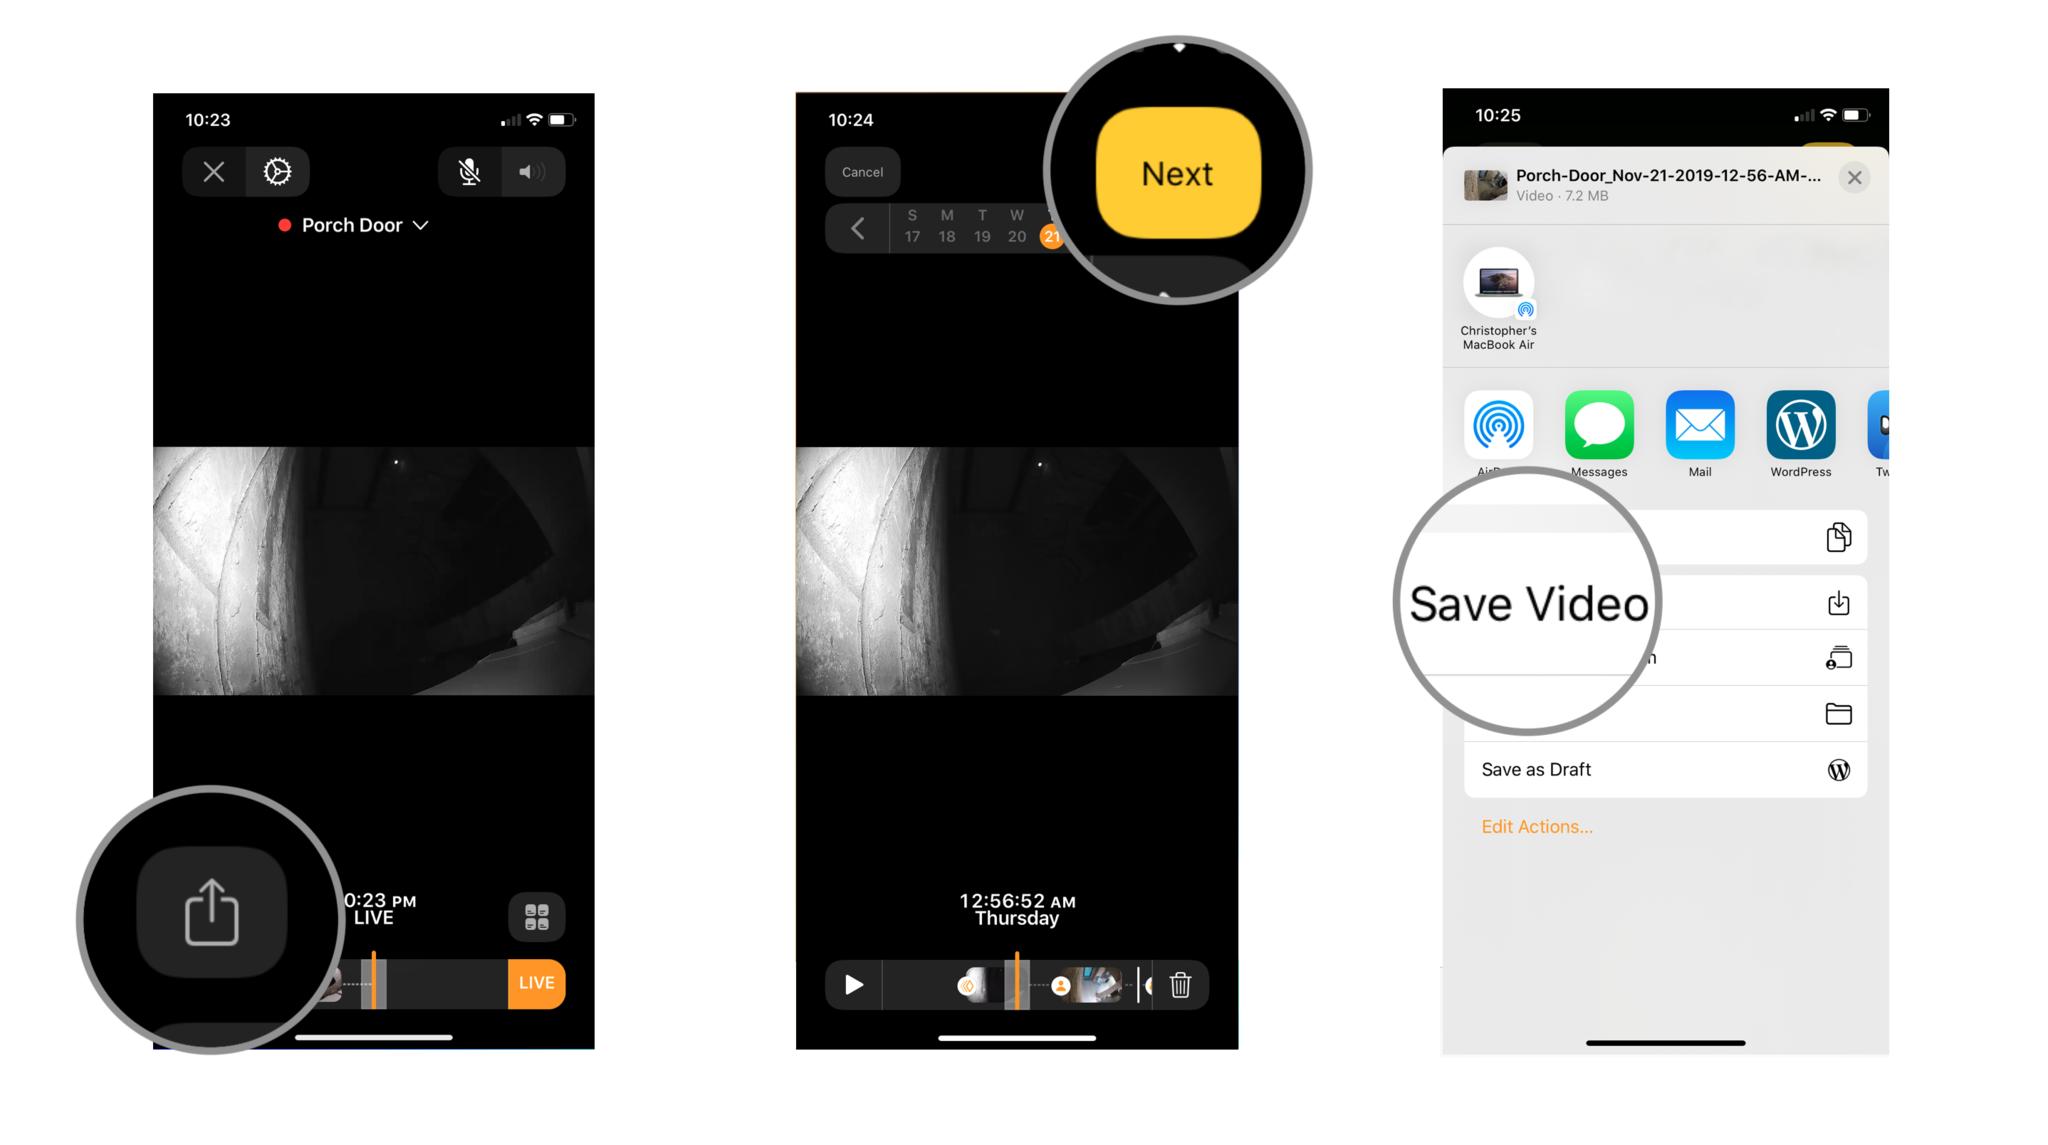 Steps 7-9 depicting how to save video in the Home app